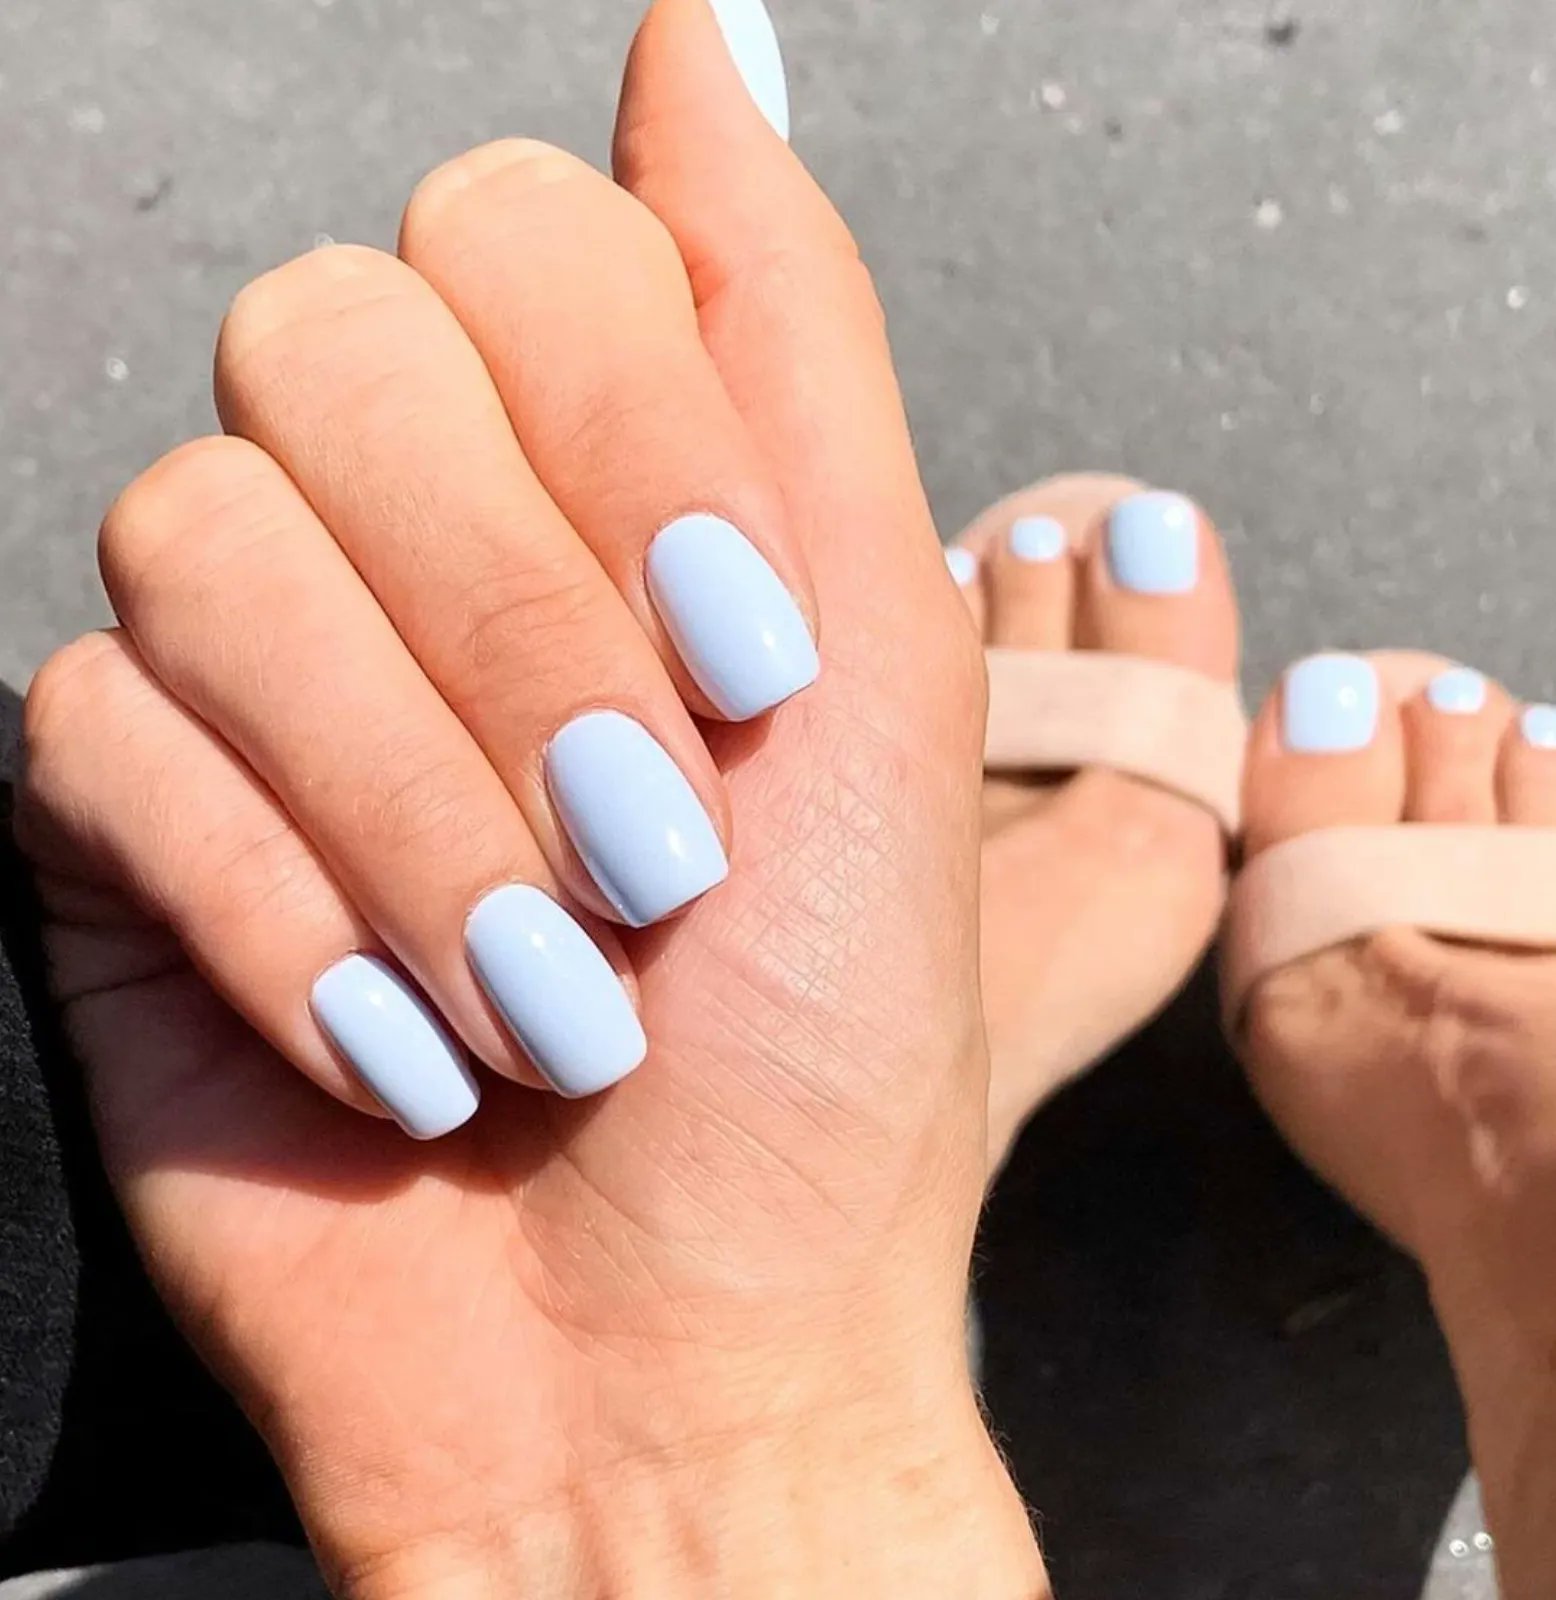 Scan Symposium Glat Twitter 上的 Nail Polish Direct™："Baby Blue for Spring 🦋👏🏻😍 Wearing OPI  Matching Mani and Pedi by @gretchenstyle Shop now on Nail Polish Direct  with Free UK Delivery 🦋 #OPIObsessed #ColorIsTheAnswer #NOTD #NailSwag #